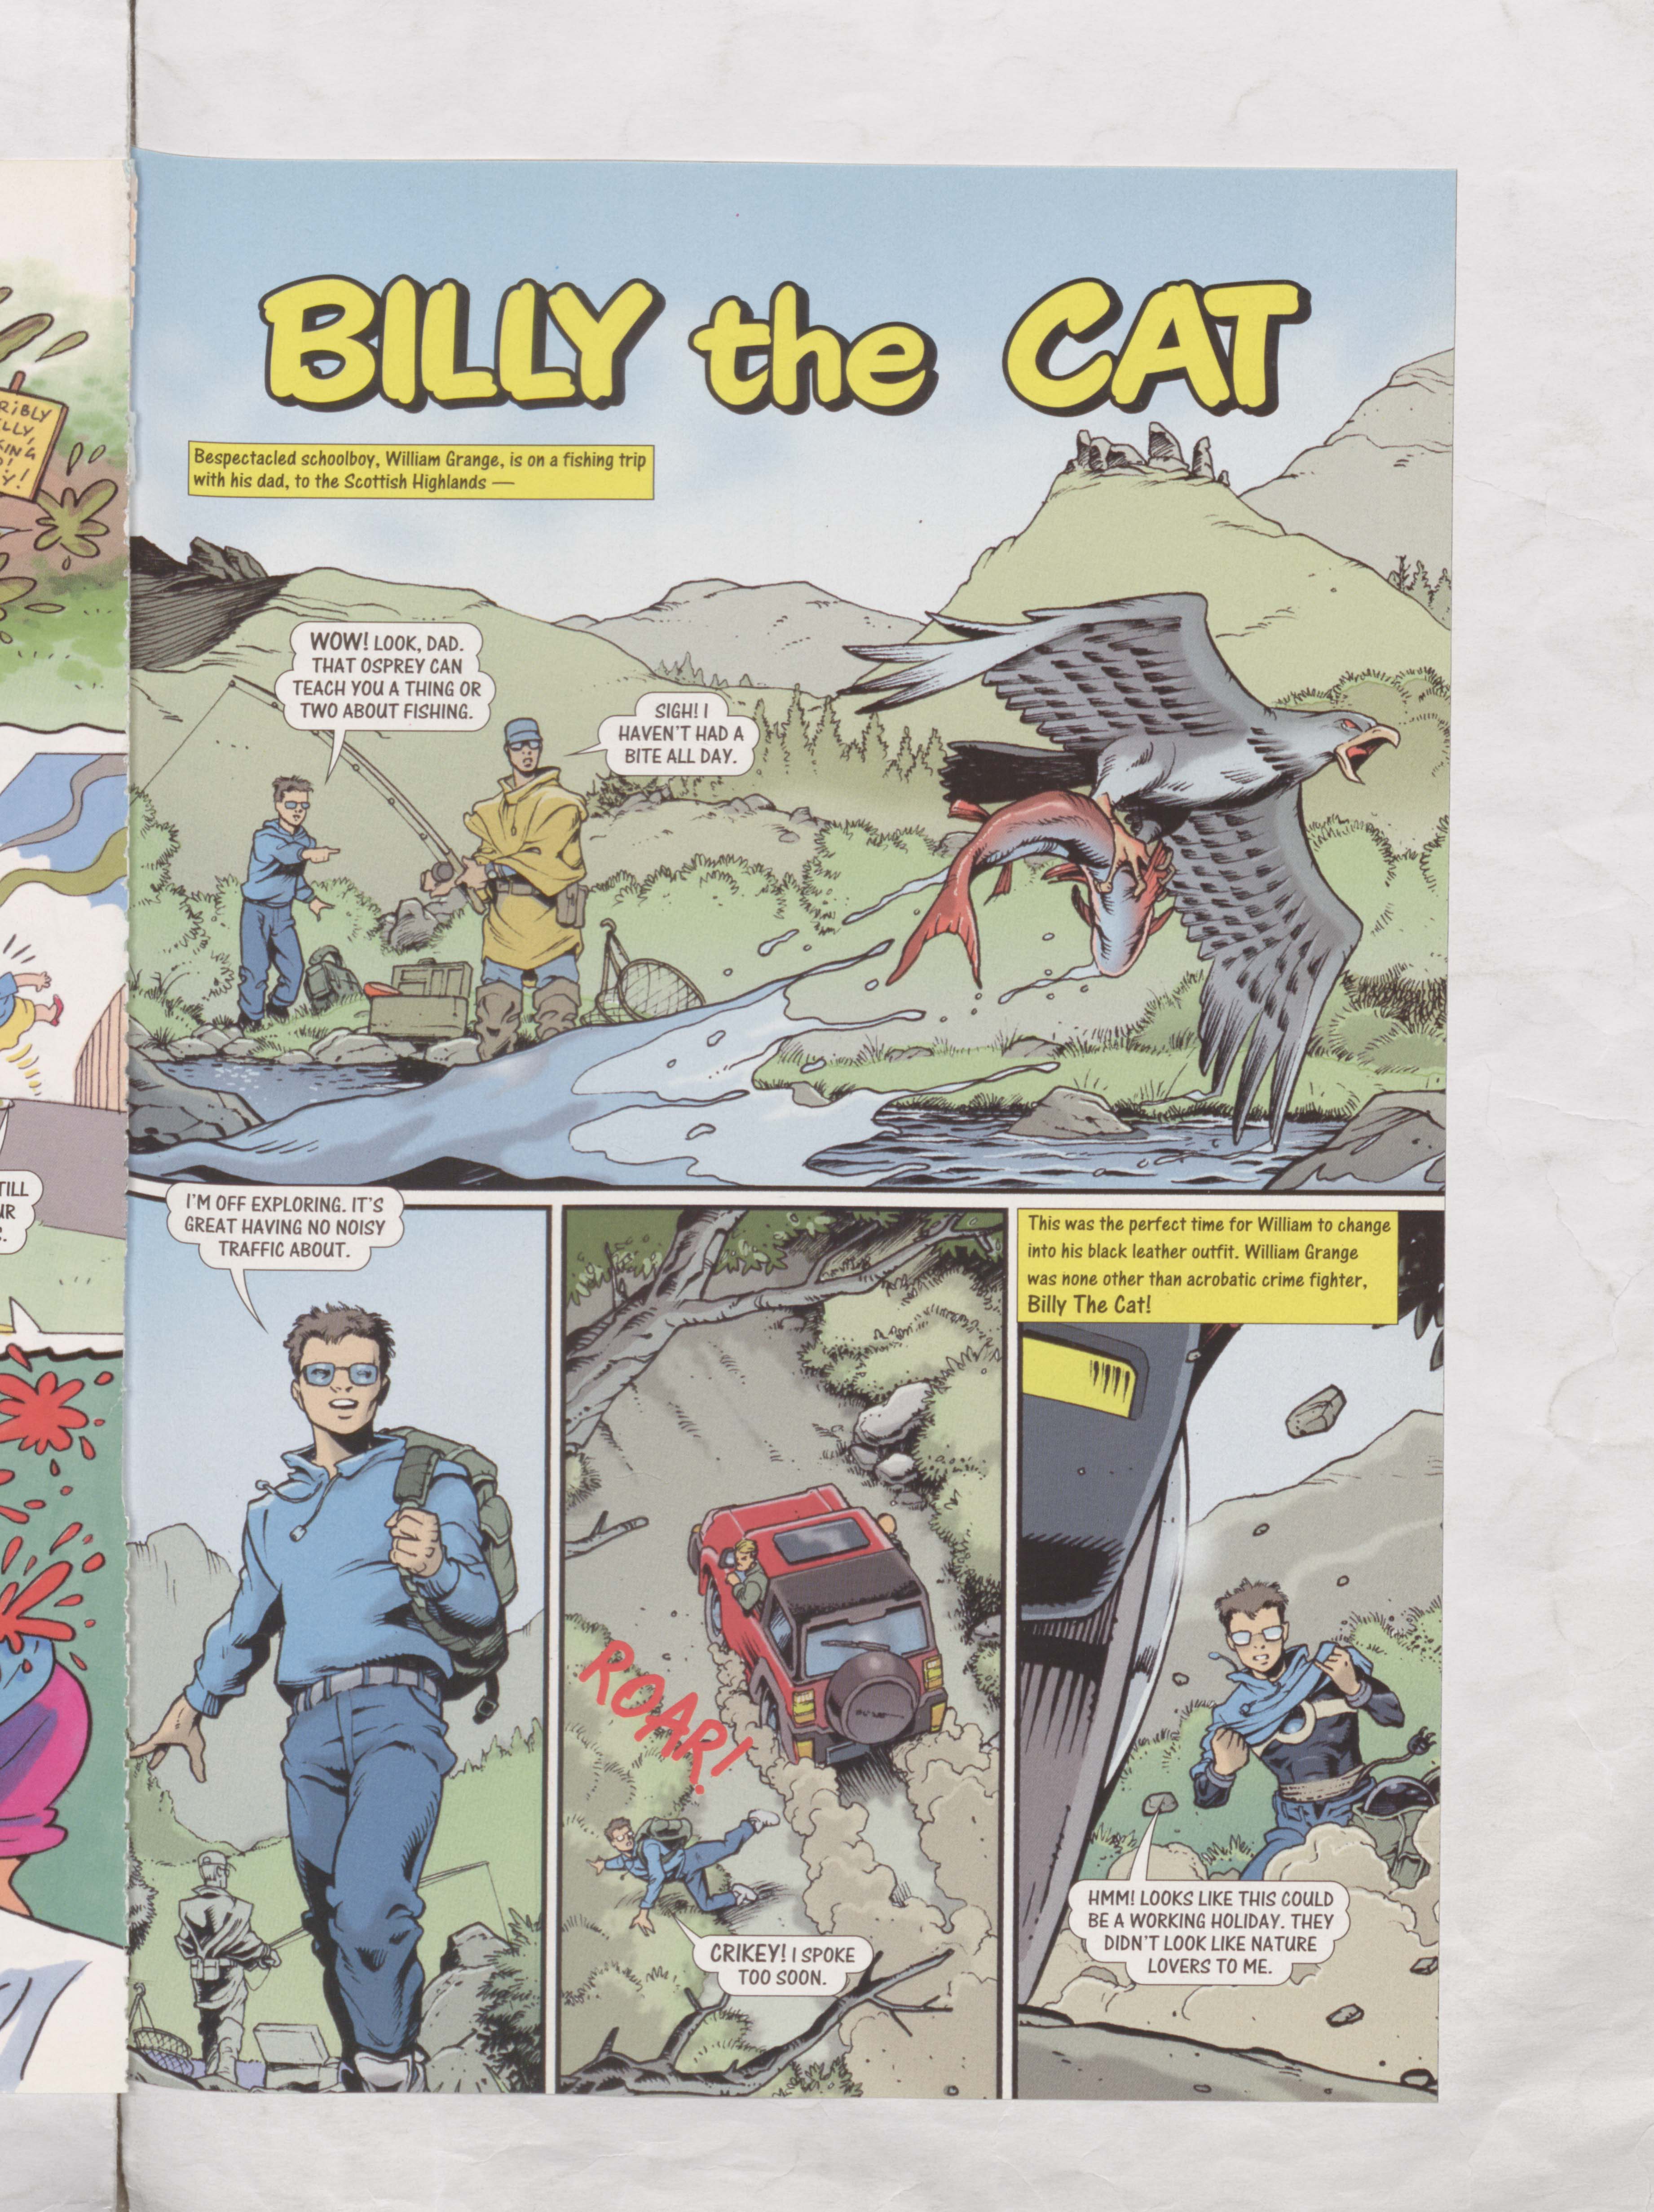 Billy the Cat - Beano Annual 2004